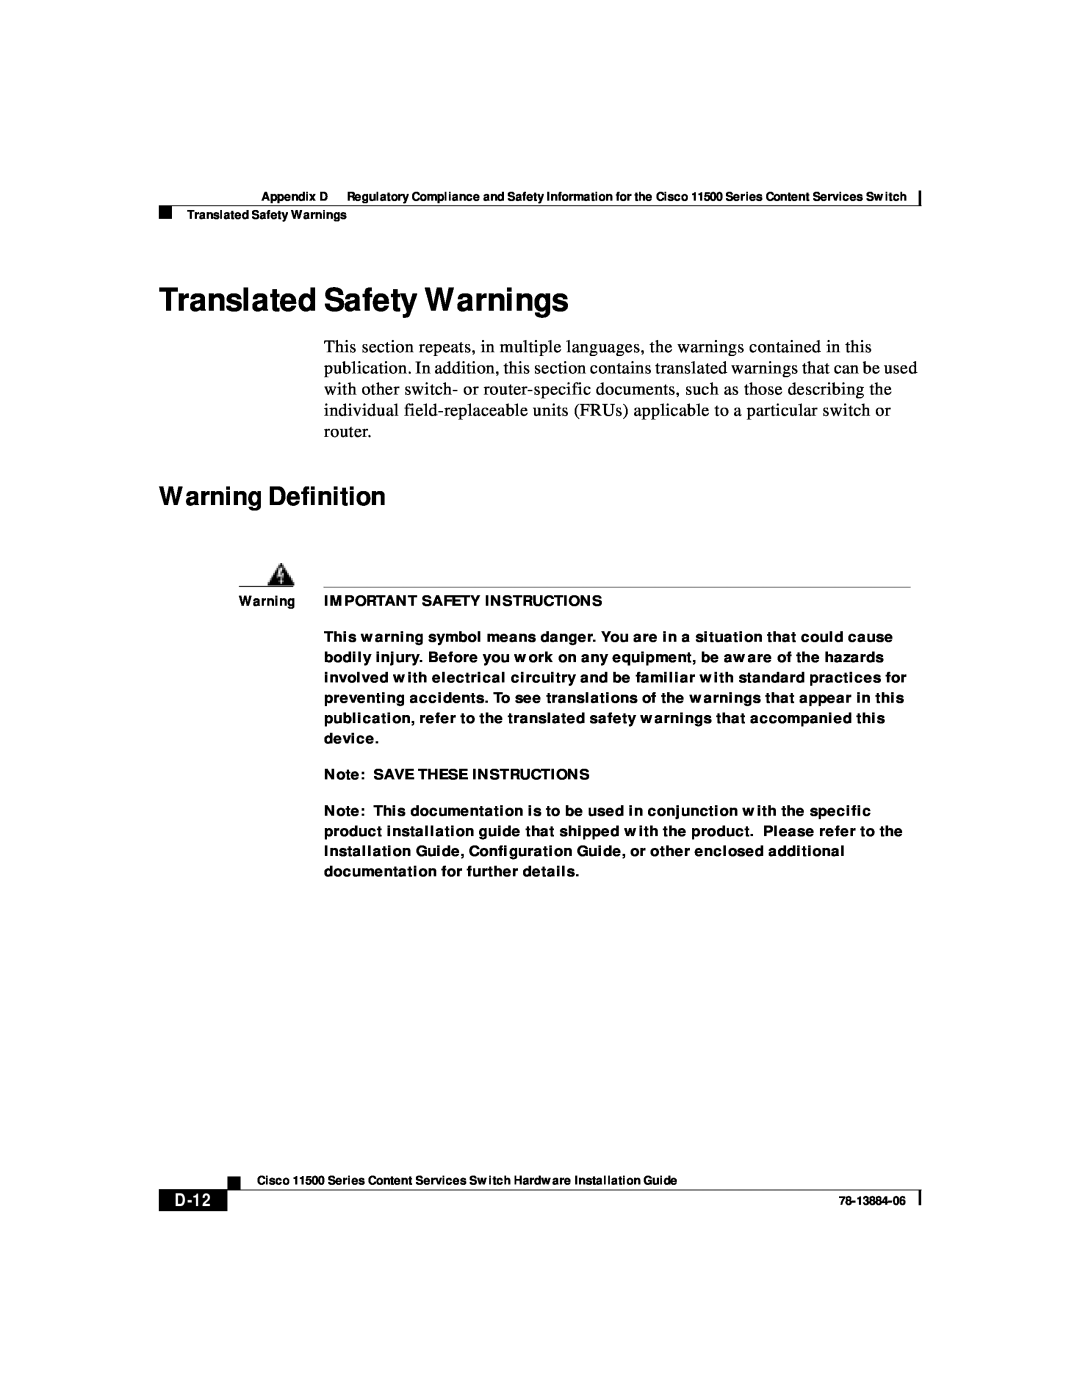 Cisco Systems 11500 Series manual Translated Safety Warnings, Warning Definition, D-12 